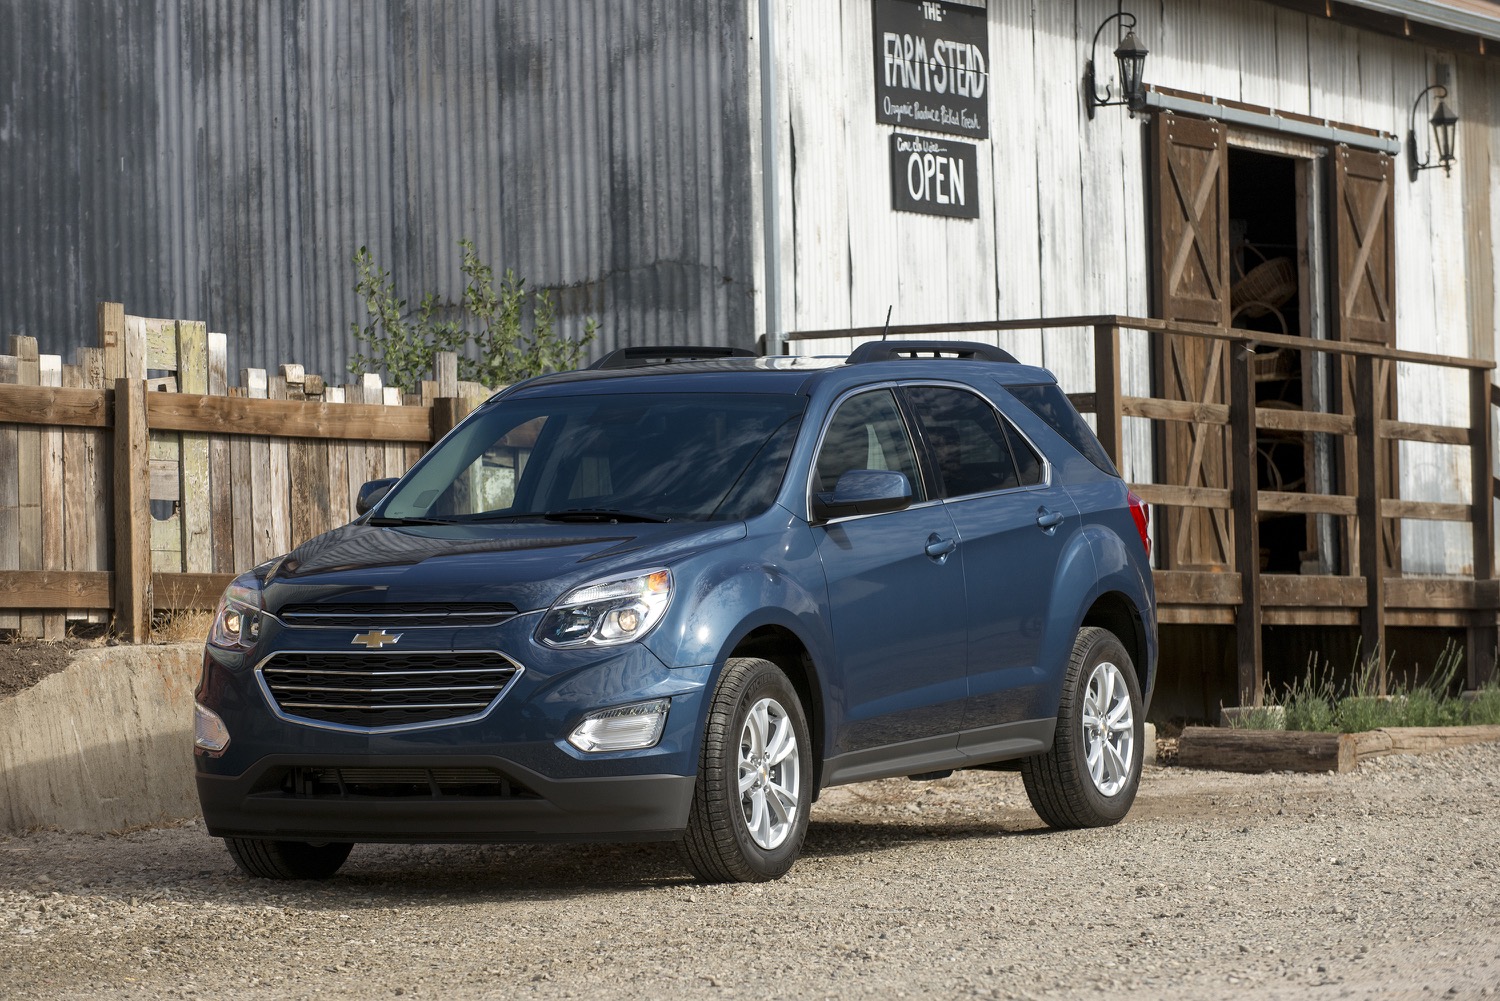 Chevy Equinox S Up 10 Percent To 21 600 Units In November 2017